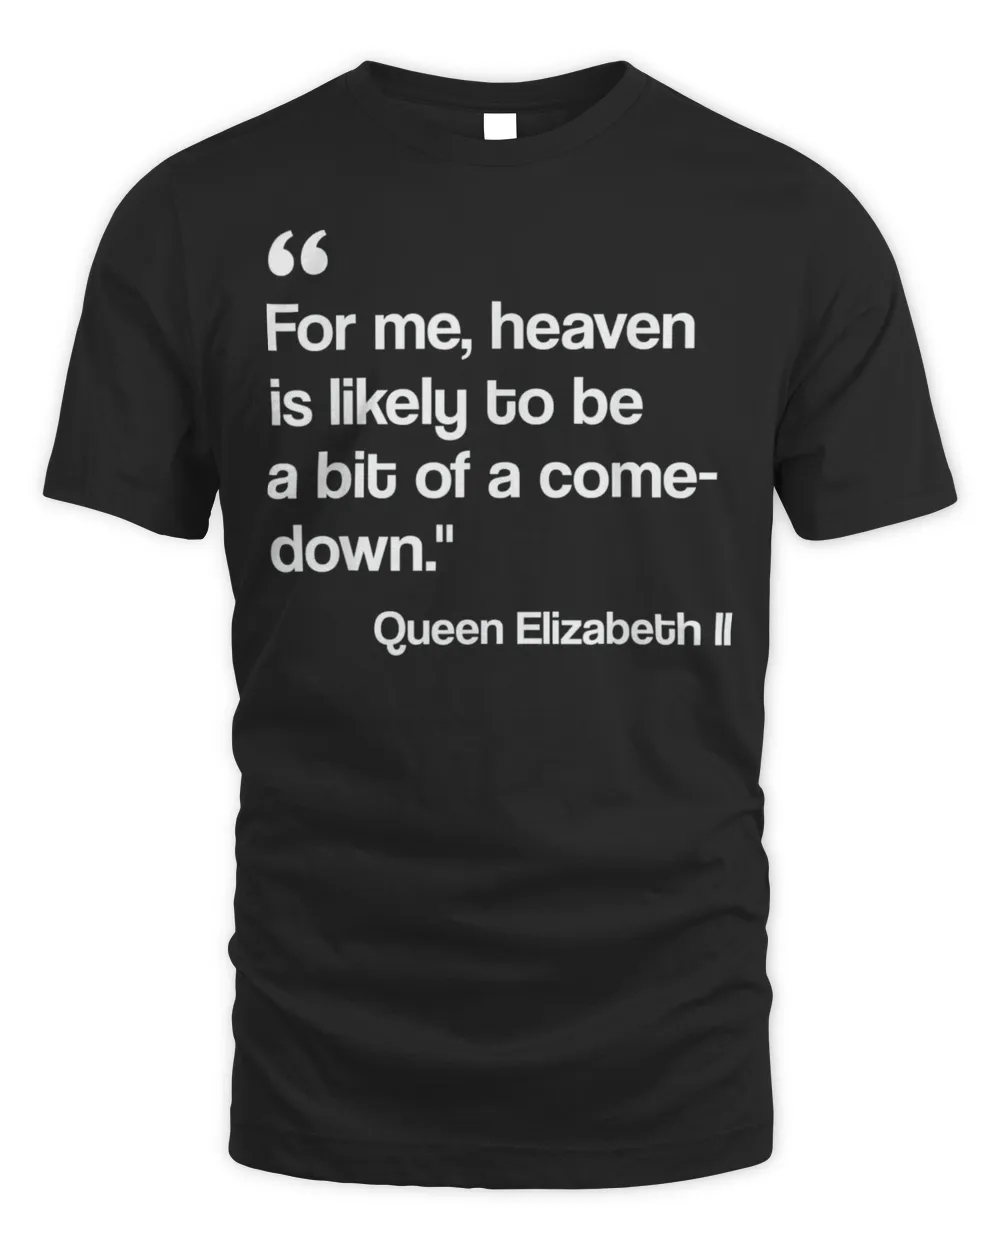 For Me Heaven Is Likely To Be A Bit Of A Comedown Quote T-Shirt